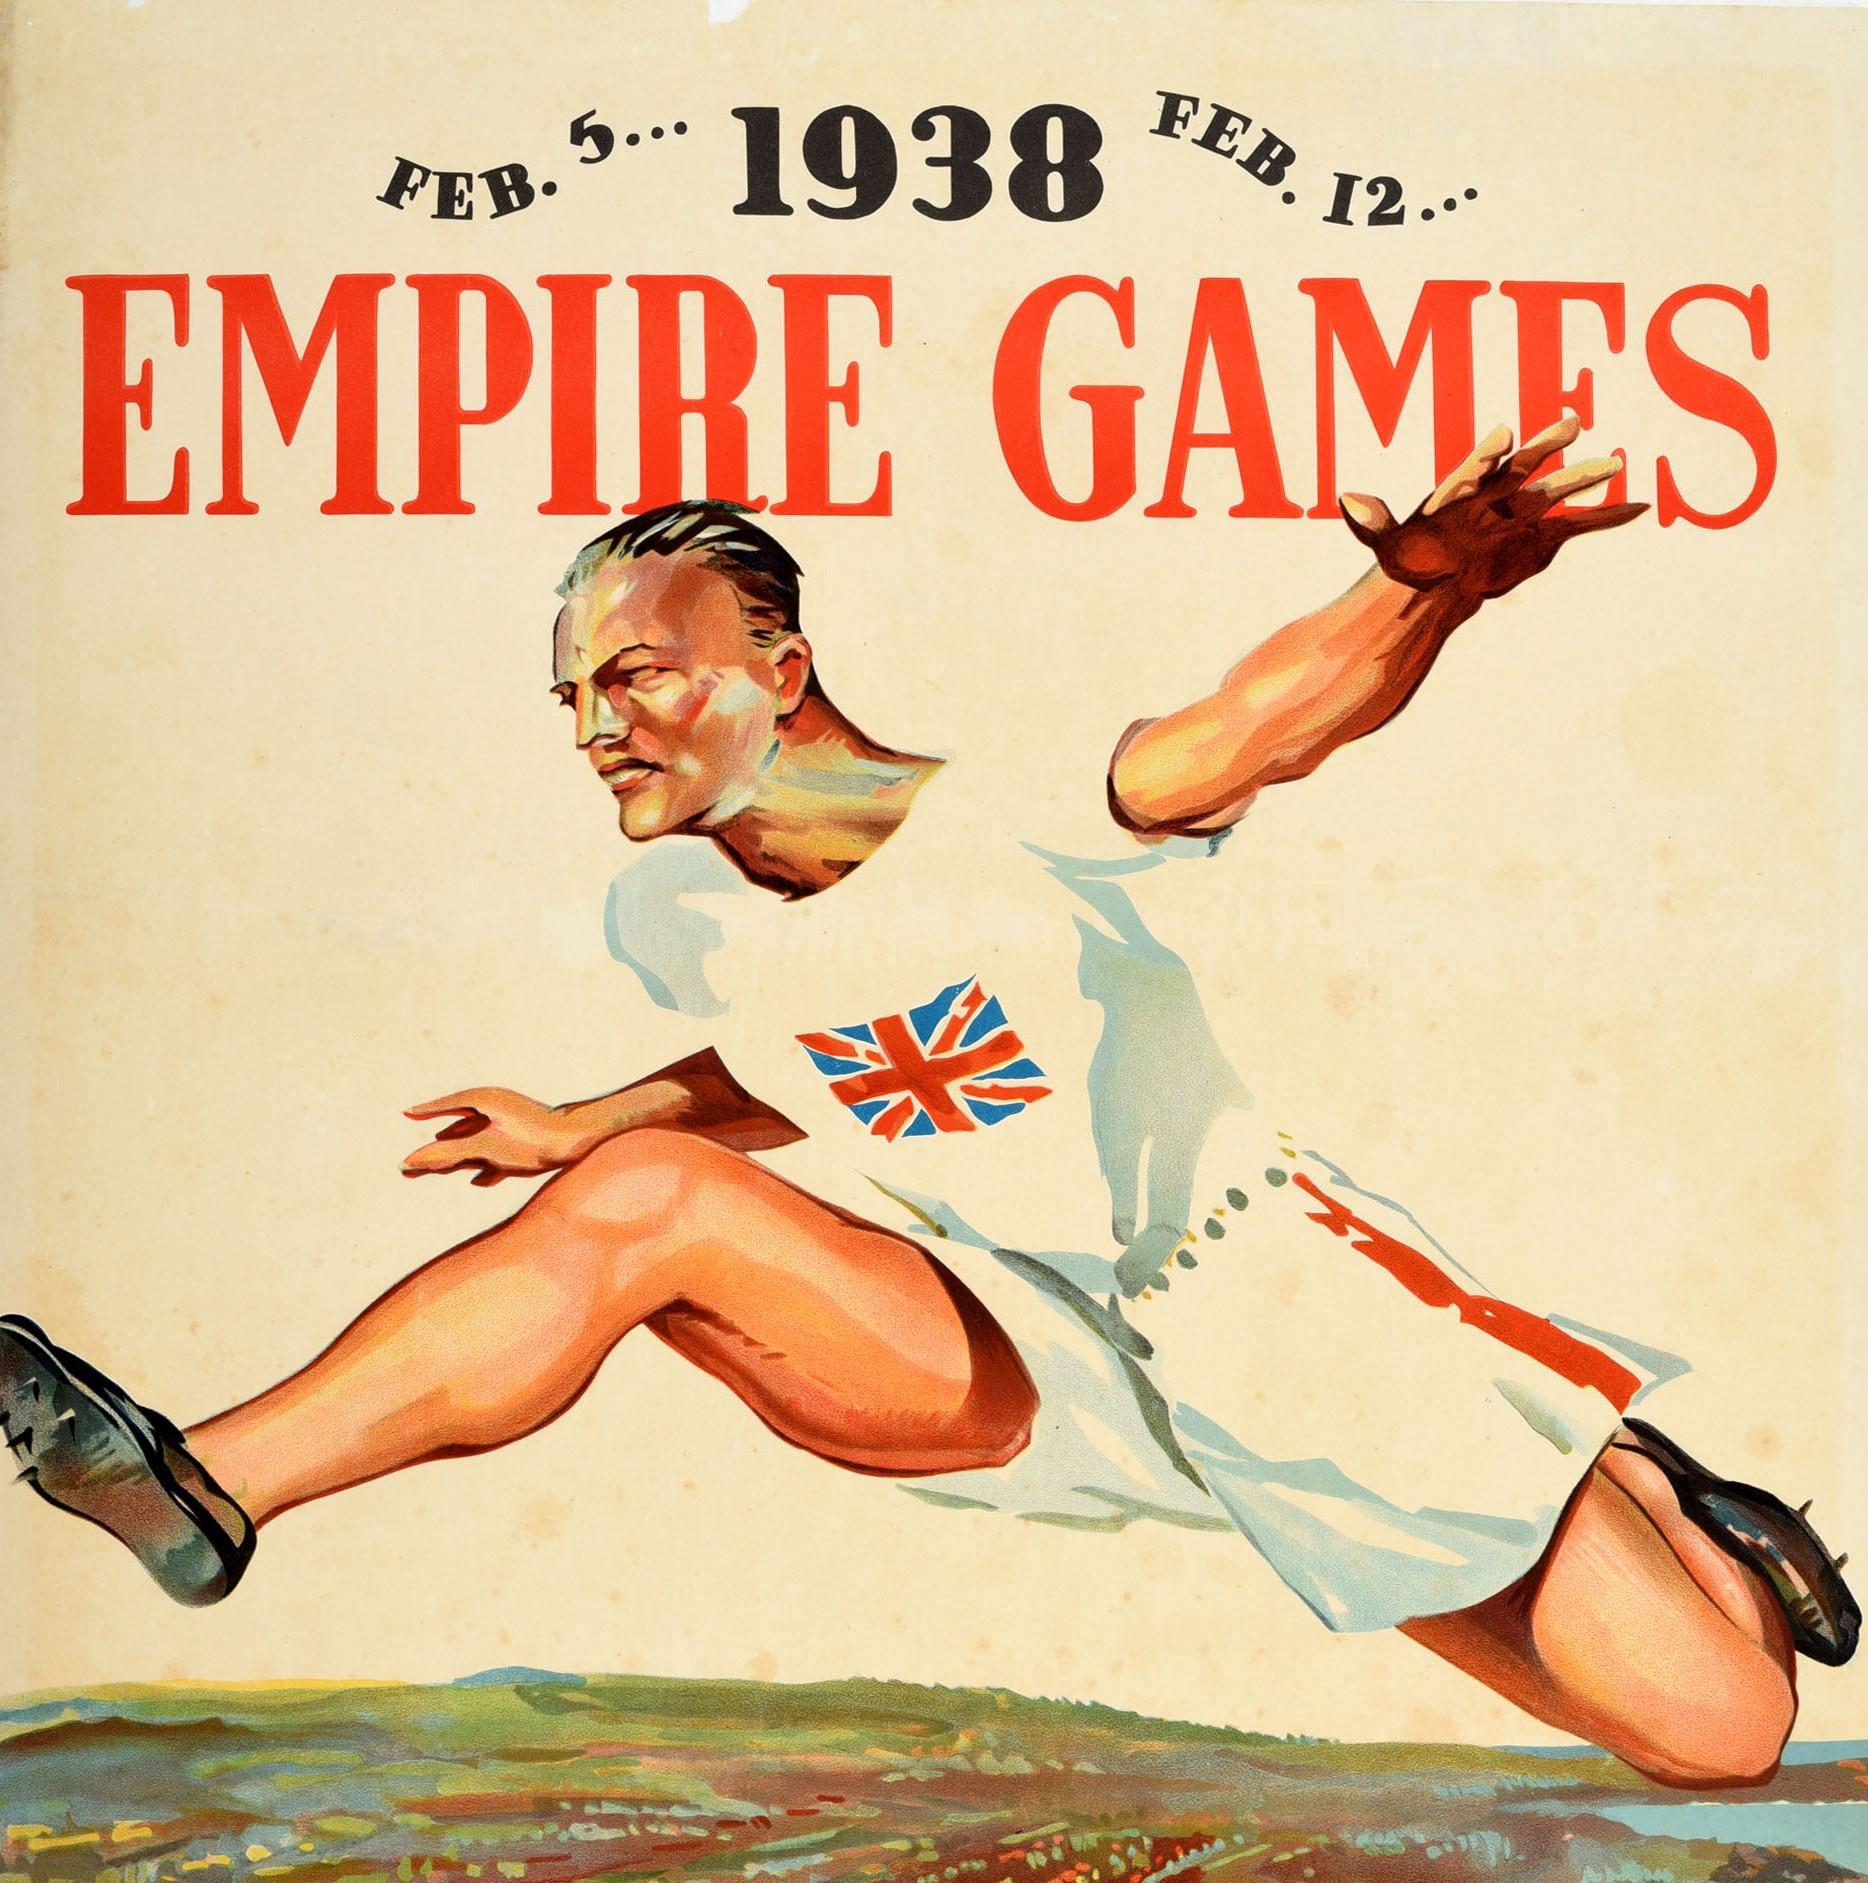 Original vintage sport event poster for the 1938 Empire Games Feb. 5... Feb. 12... Sydney calls you... Australia's 150th Anniversary Celebrations January 26 to April 25 1938. Great design by Charles Meere (1890-1961) of an athlete in a Union Jack